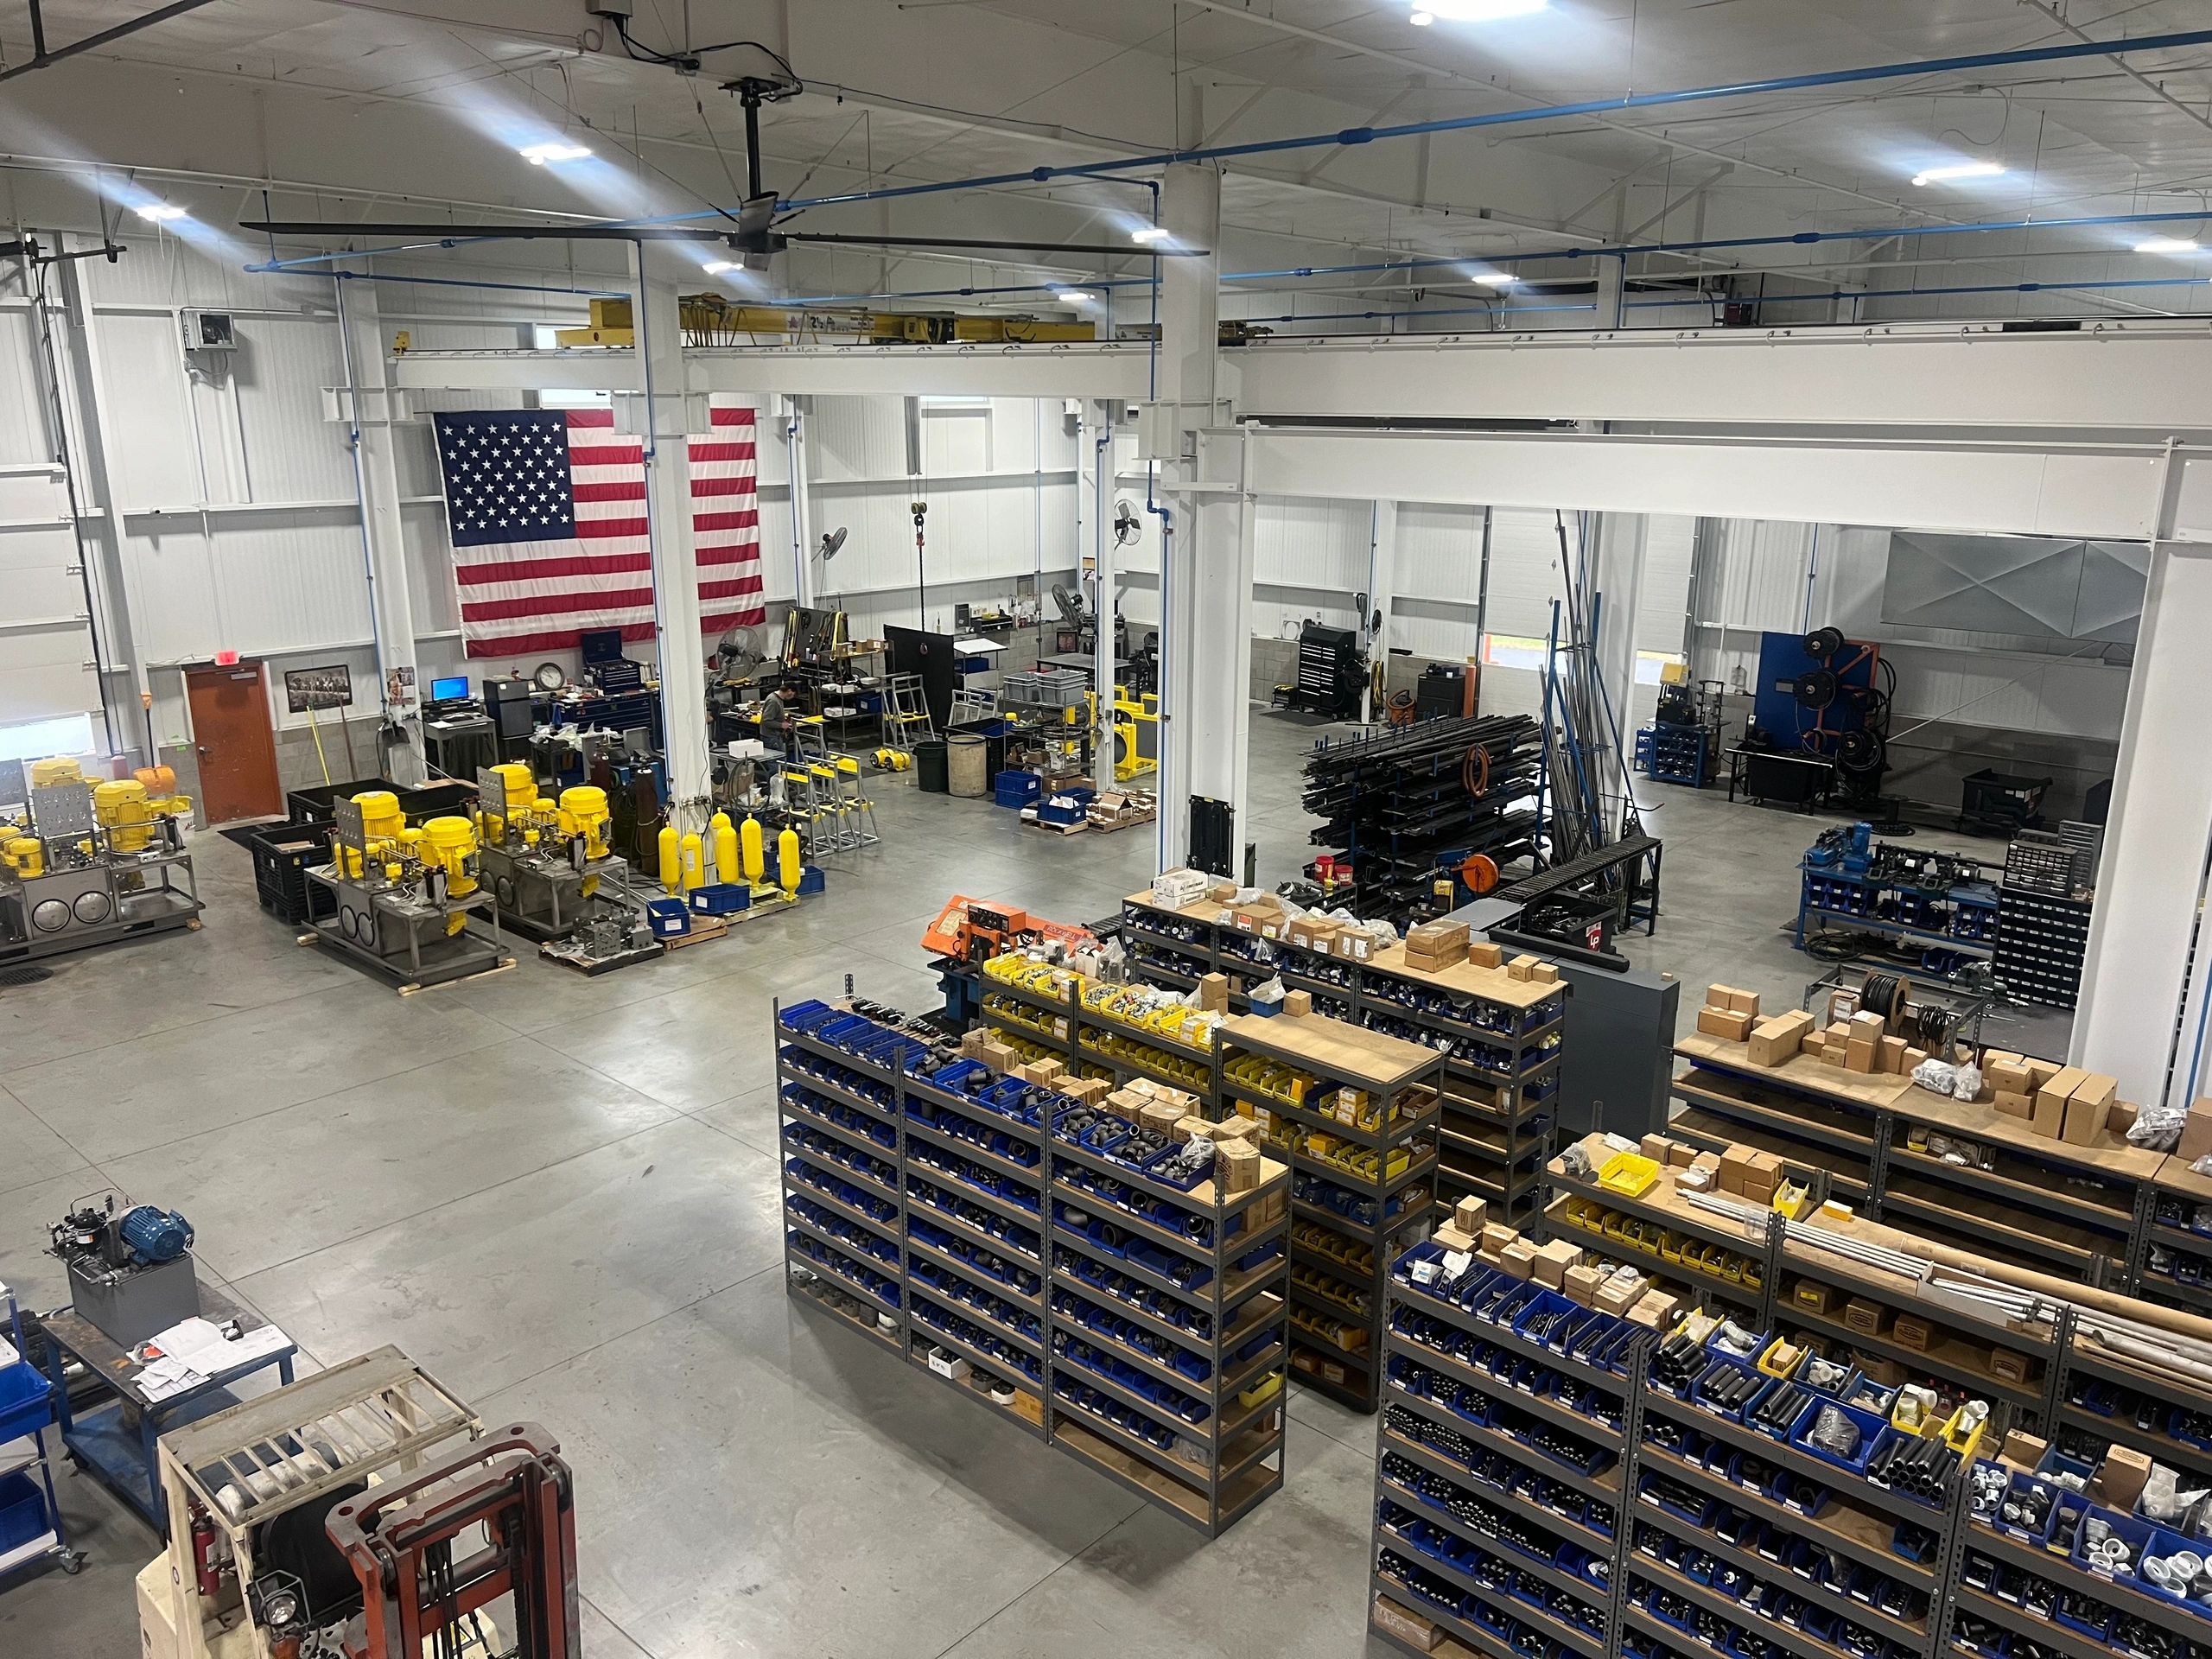 Picture of warehouse showing shelves of products. 
American flag proudly hangs on the warehouse wall